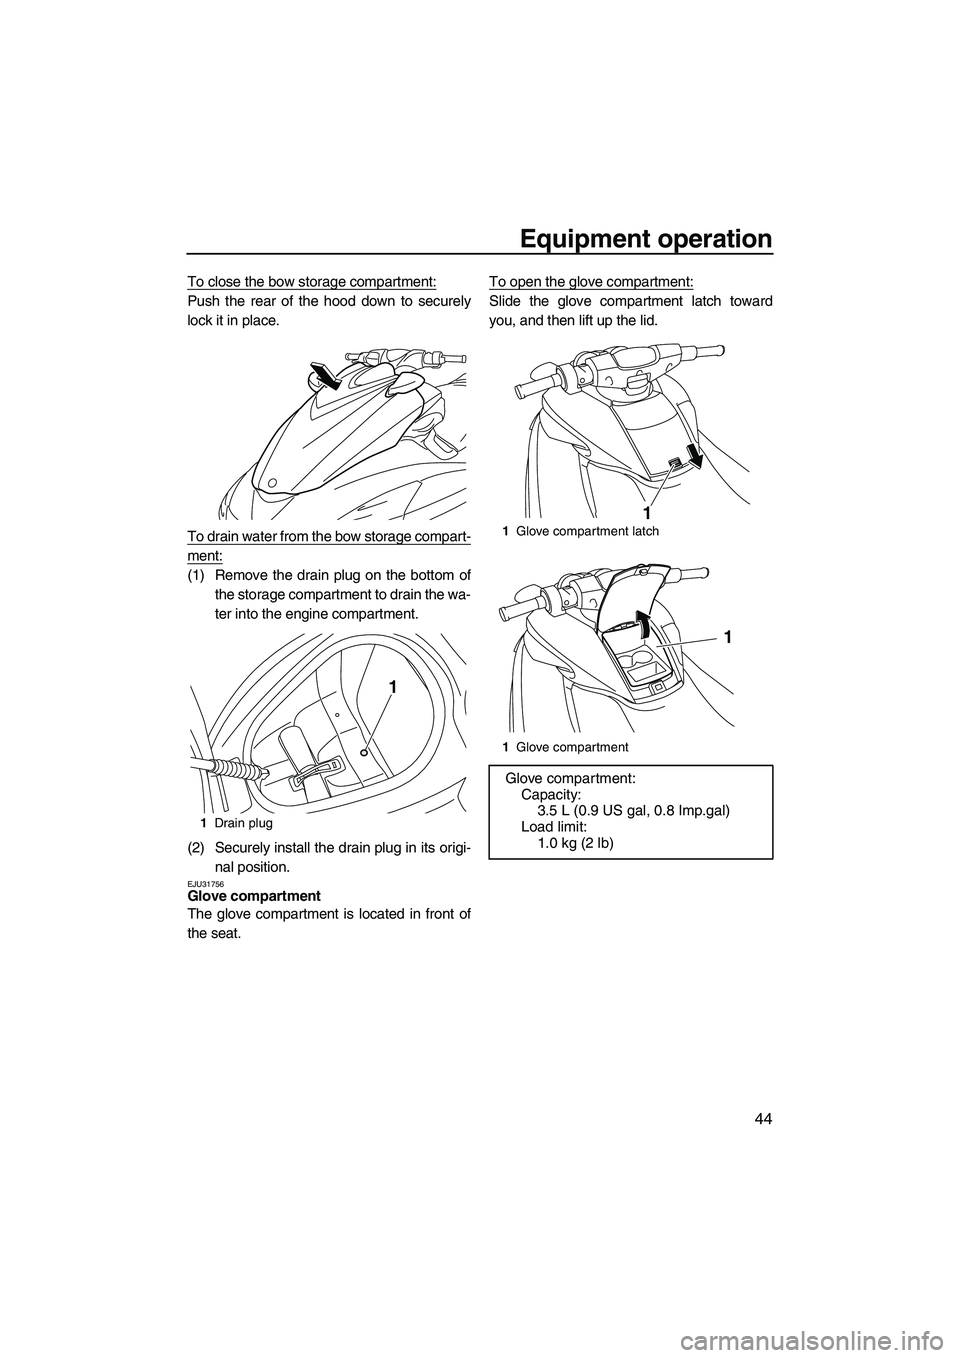 YAMAHA FZS 2010  Owners Manual Equipment operation
44
To close the bow storage compartment:
Push the rear of the hood down to securely
lock it in place.
To drain water from the bow storage compart-
ment:
(1) Remove the drain plug o